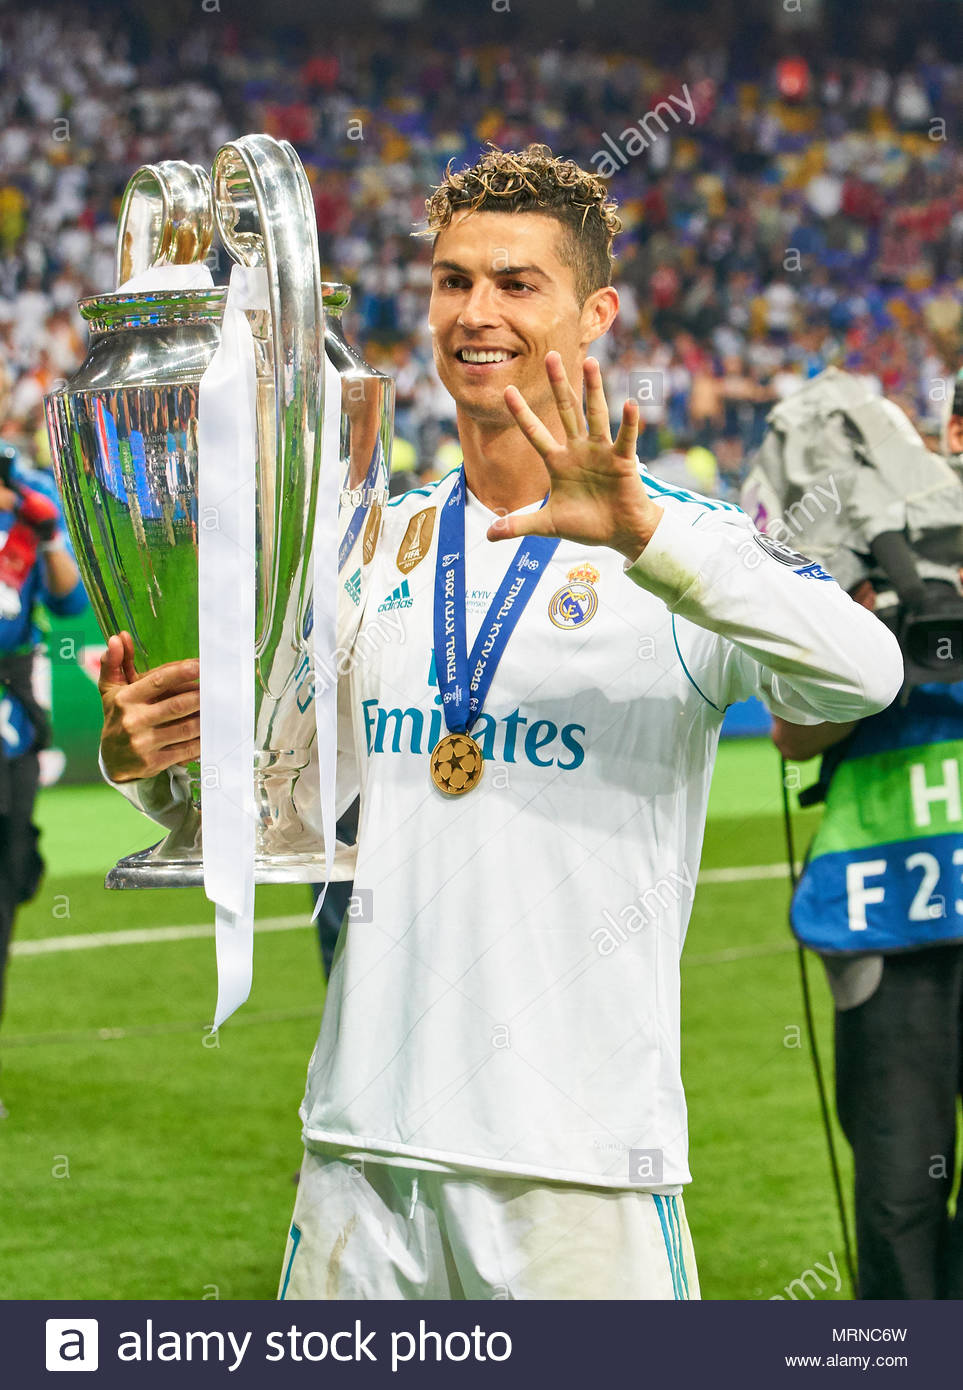 43+ Cristiano Ronaldo With UCL Trophy Wallpapers on ...